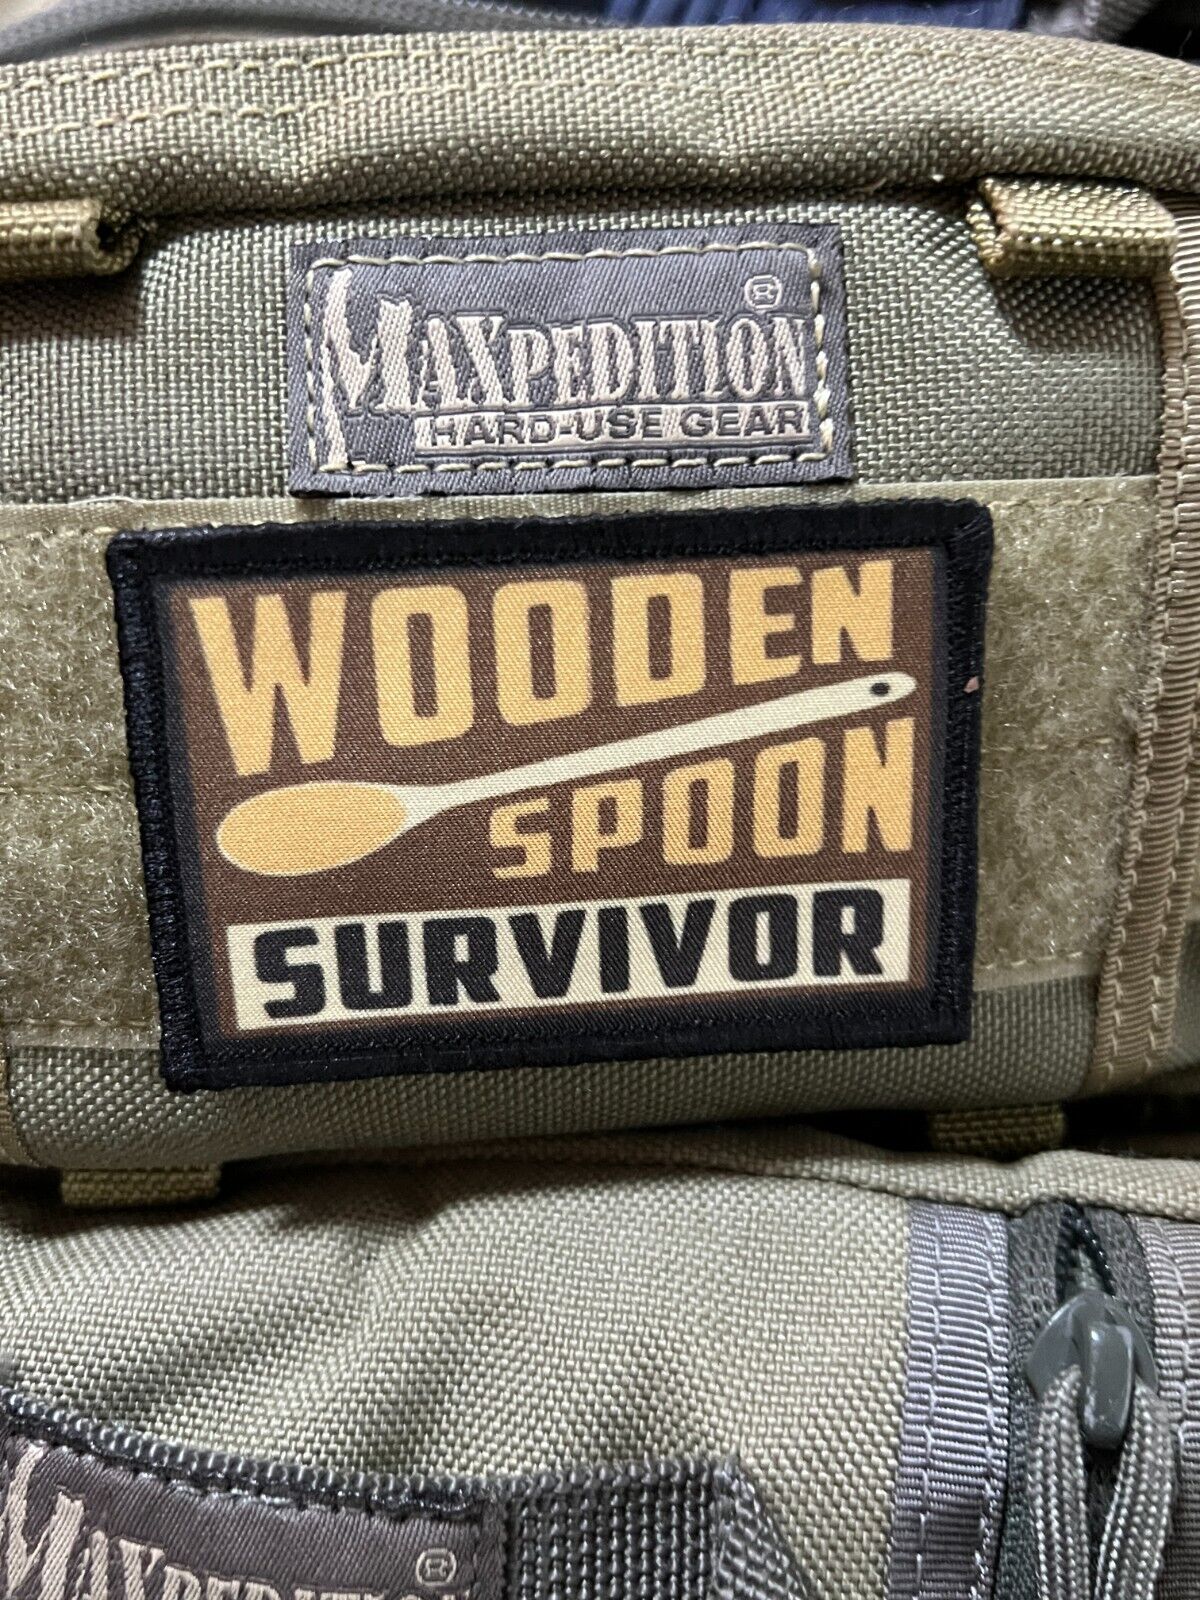 Wooden Spoon Survivor Morale Patch Tactical Military Army Badge USA